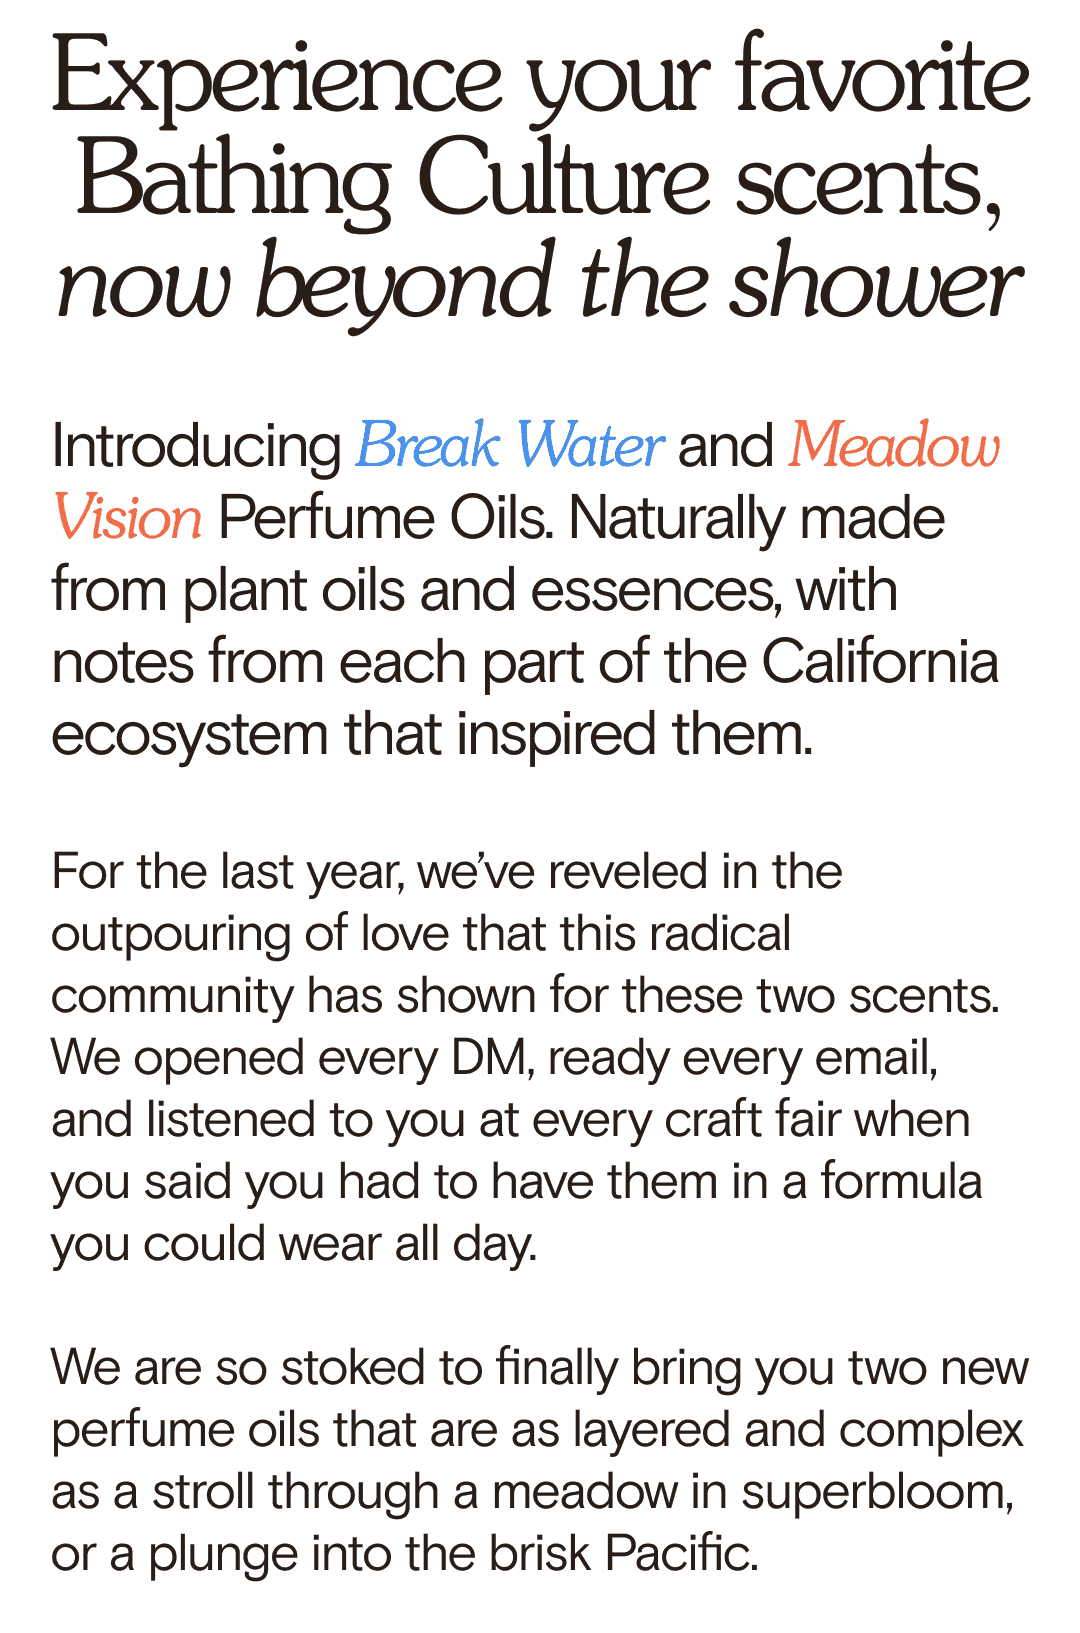 Experience your favorite Bathing Culture scents, now beyond the shower Introducing Break Water and Meadow Vision Perfume Oils. Naturally made from plant oils and essences, with notes from each part of the California ecosystem that inspired them. For the last year, we’ve reveled in the outpouring of love that this radical community has shown for these two scents. We opened every DM, ready every email, and listened to you at every craft fair when you said you had to have them in a formula you could wear all day. We are so stoked to finally bring you two new perfume oils that are as layered and complex as a stroll through a meadow in superbloom, or a plunge into the brisk Pacific.